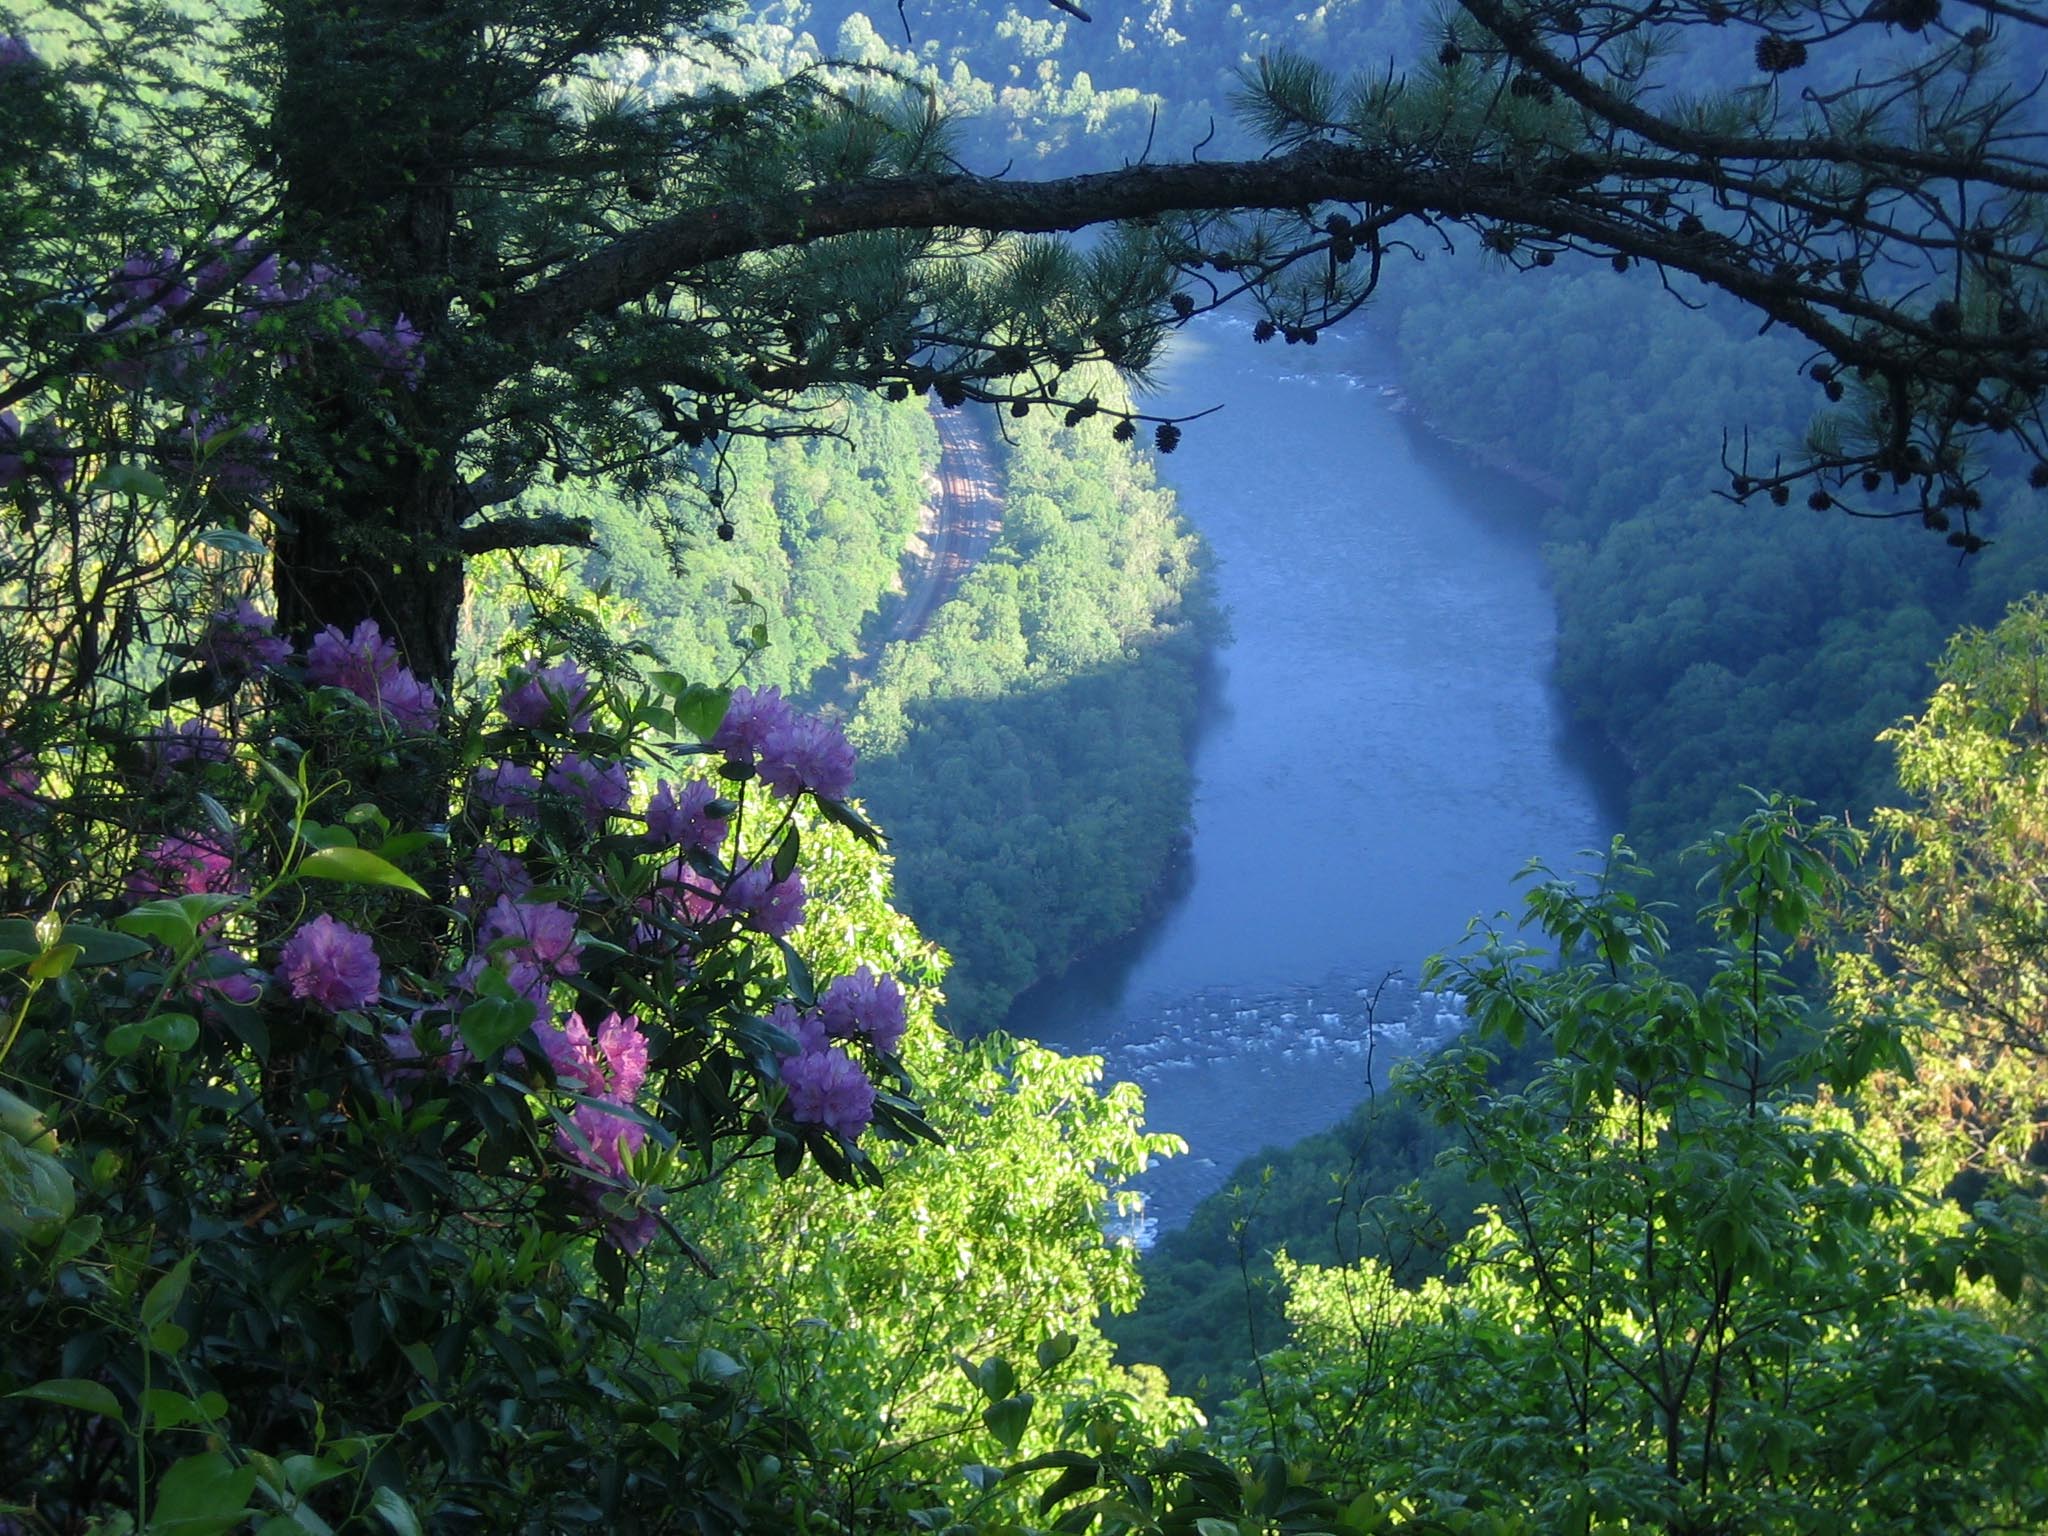 pink rhododendron and view of the gorge and river